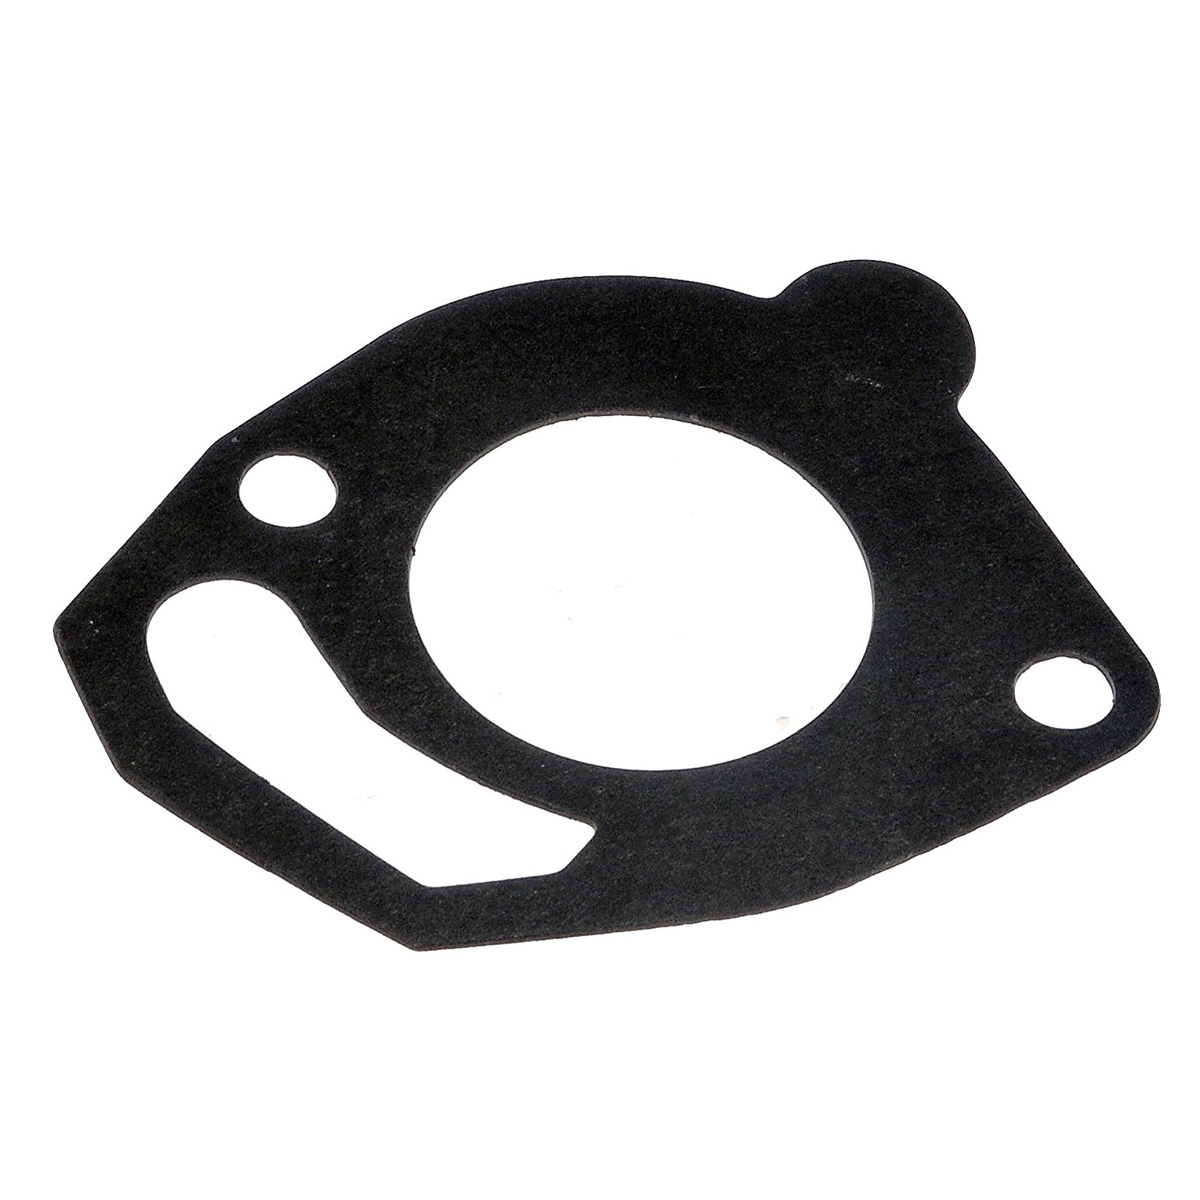 SEAT TARRACO Thermostat Gasket